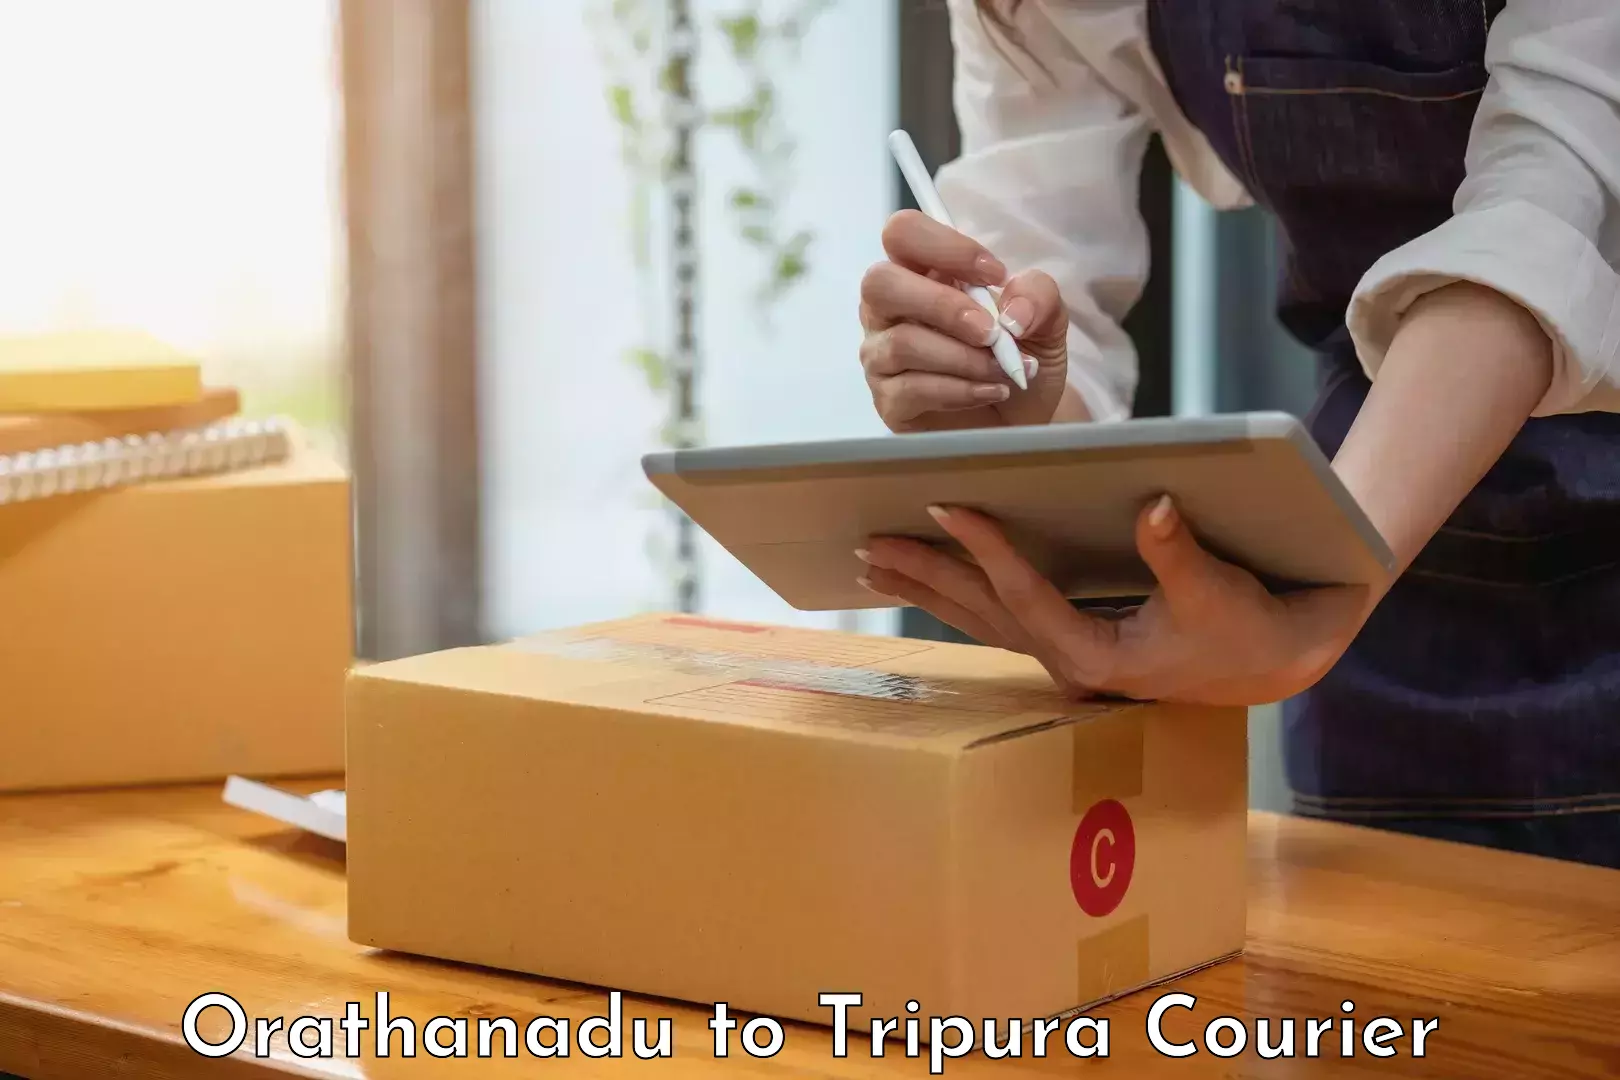 On-time delivery services Orathanadu to Tripura